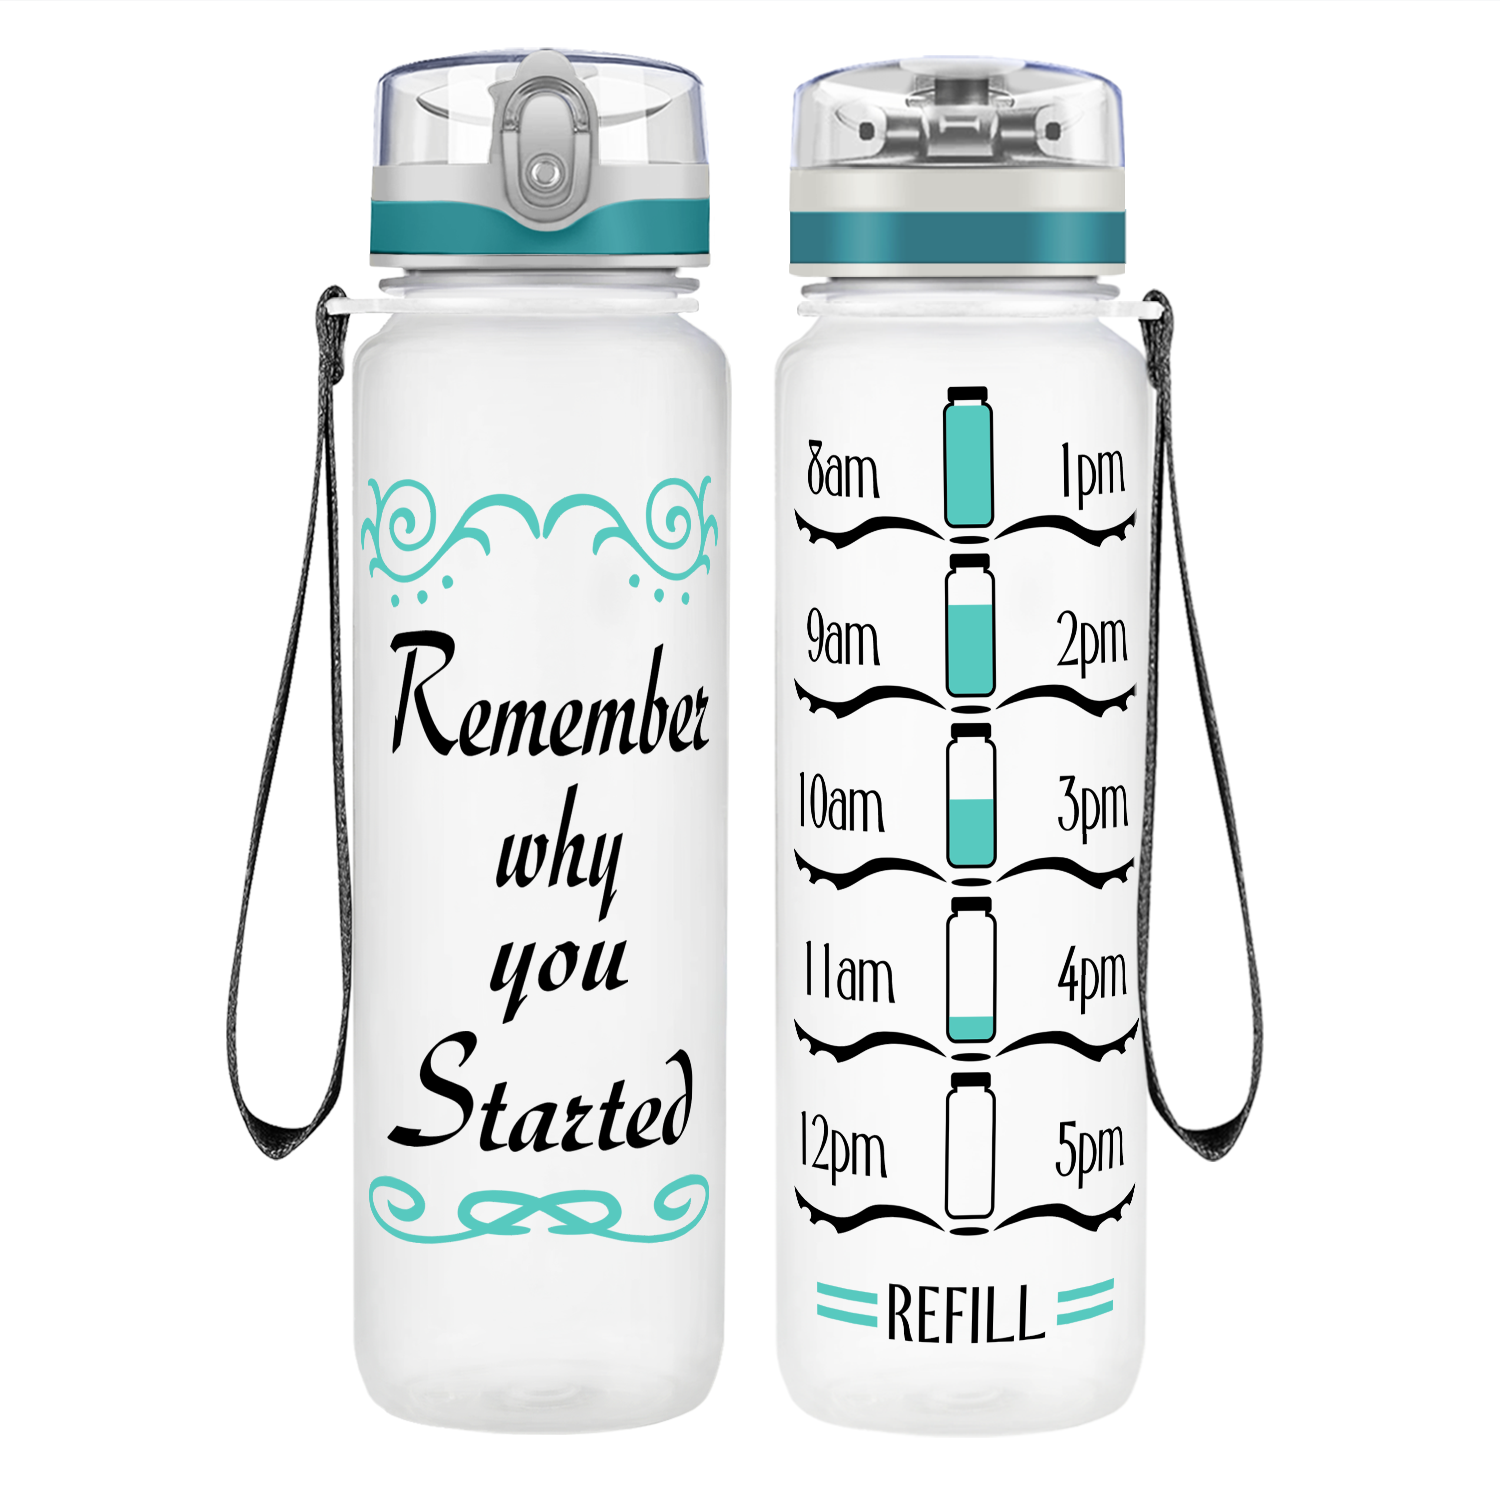 Why You Started on 32 oz Motivational Tracking Water Bottle